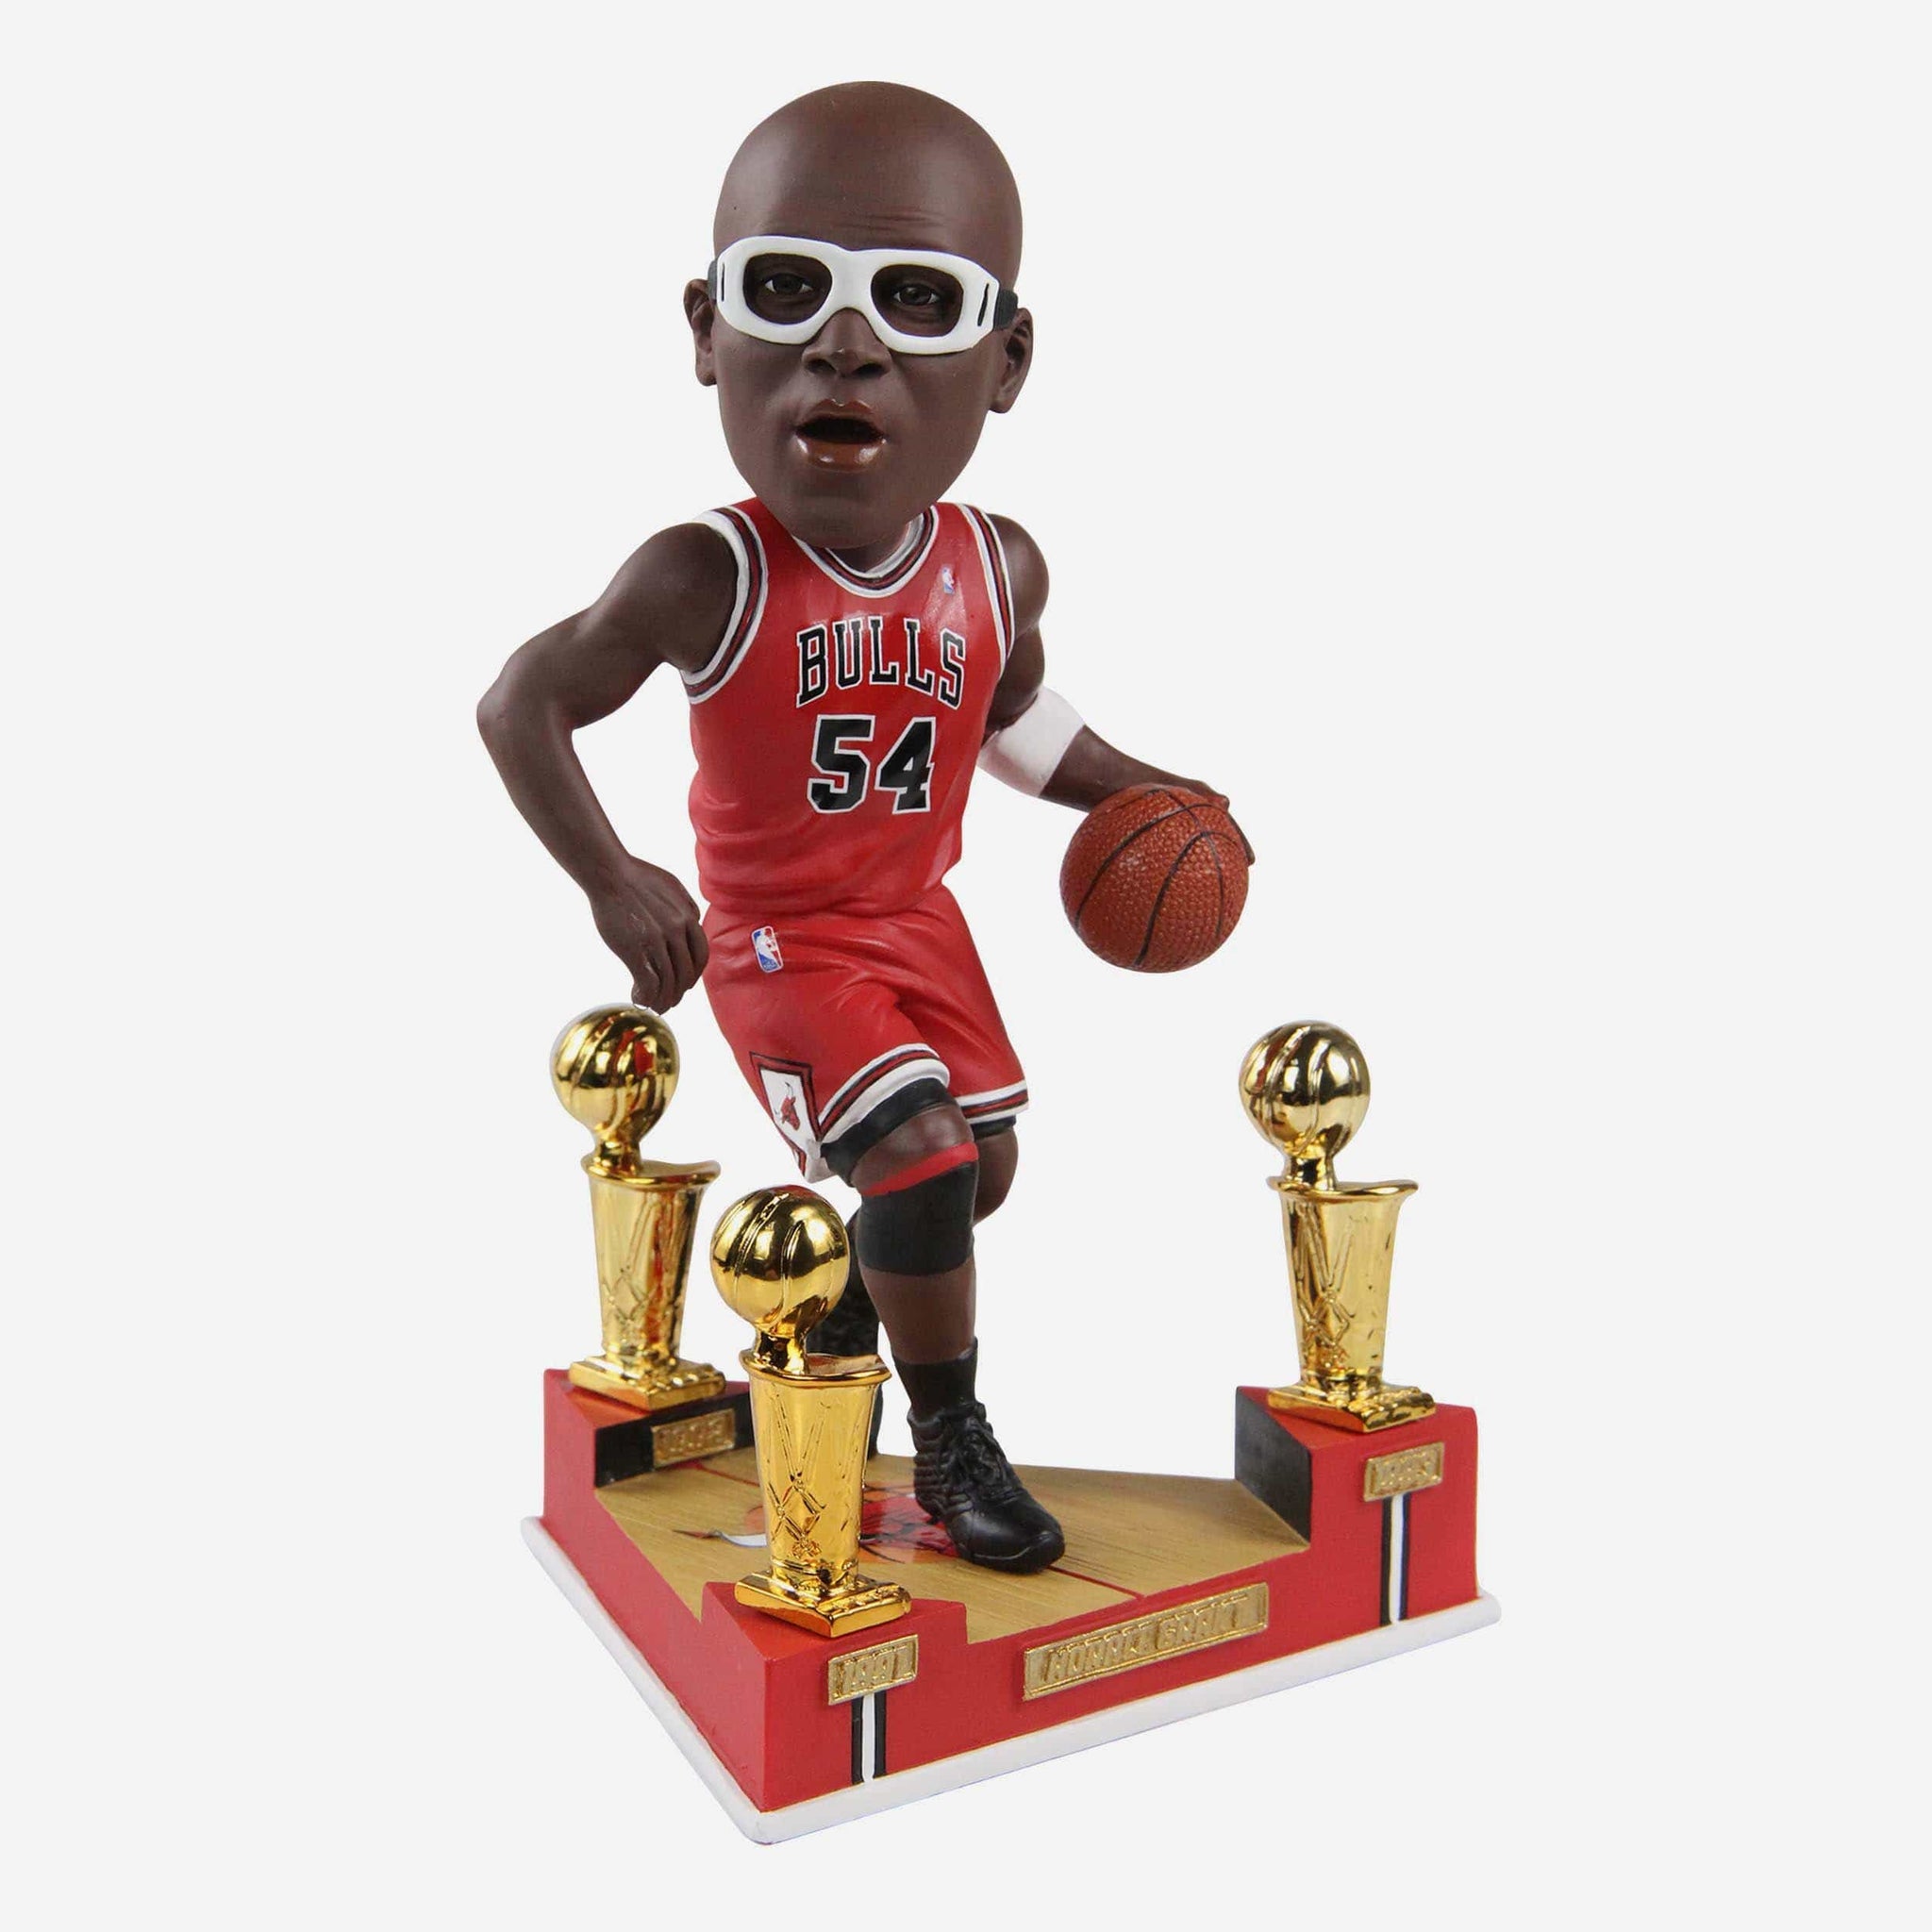 Horace ~ Always loved the goggles  Chicago sports teams, Horace grant, Nba  chicago bulls